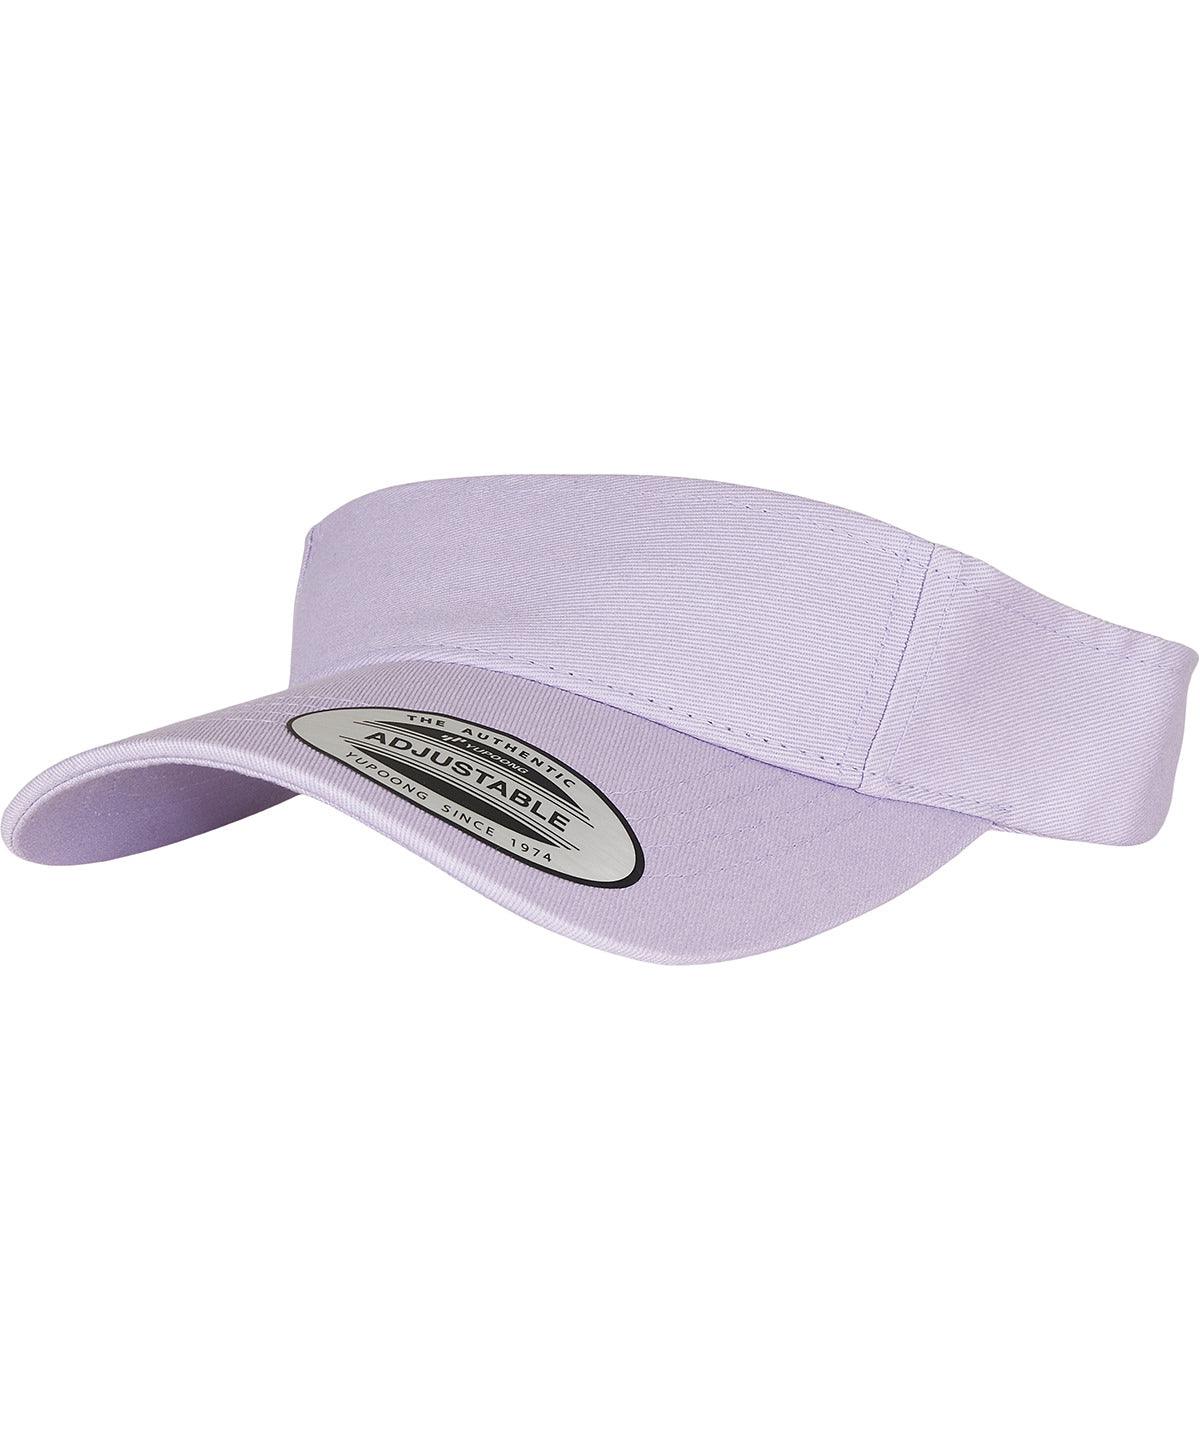 visor For (8888) HeadwearNew Flexfit cap Colours Lilac Yupoong Curved - by 2022Rebrandable